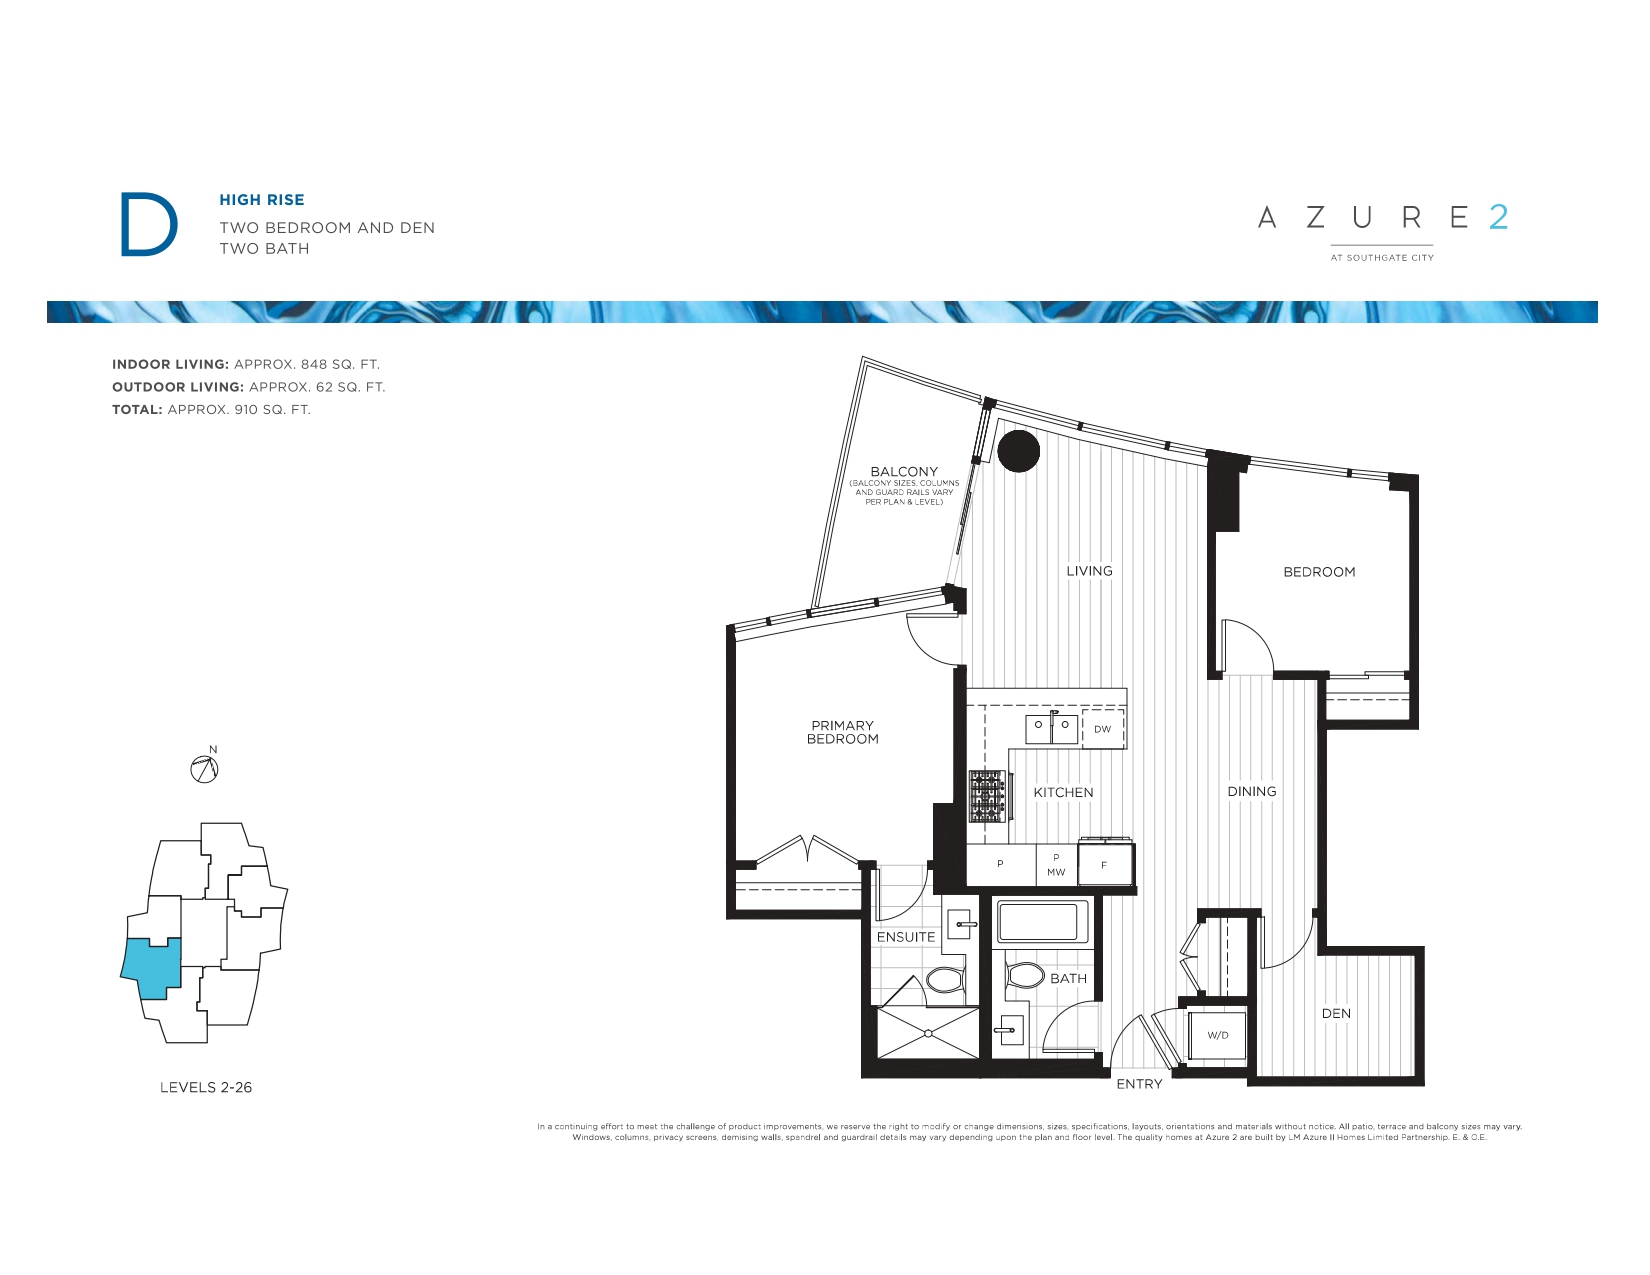 D Floor Plan of Azure 2 Condos with undefined beds